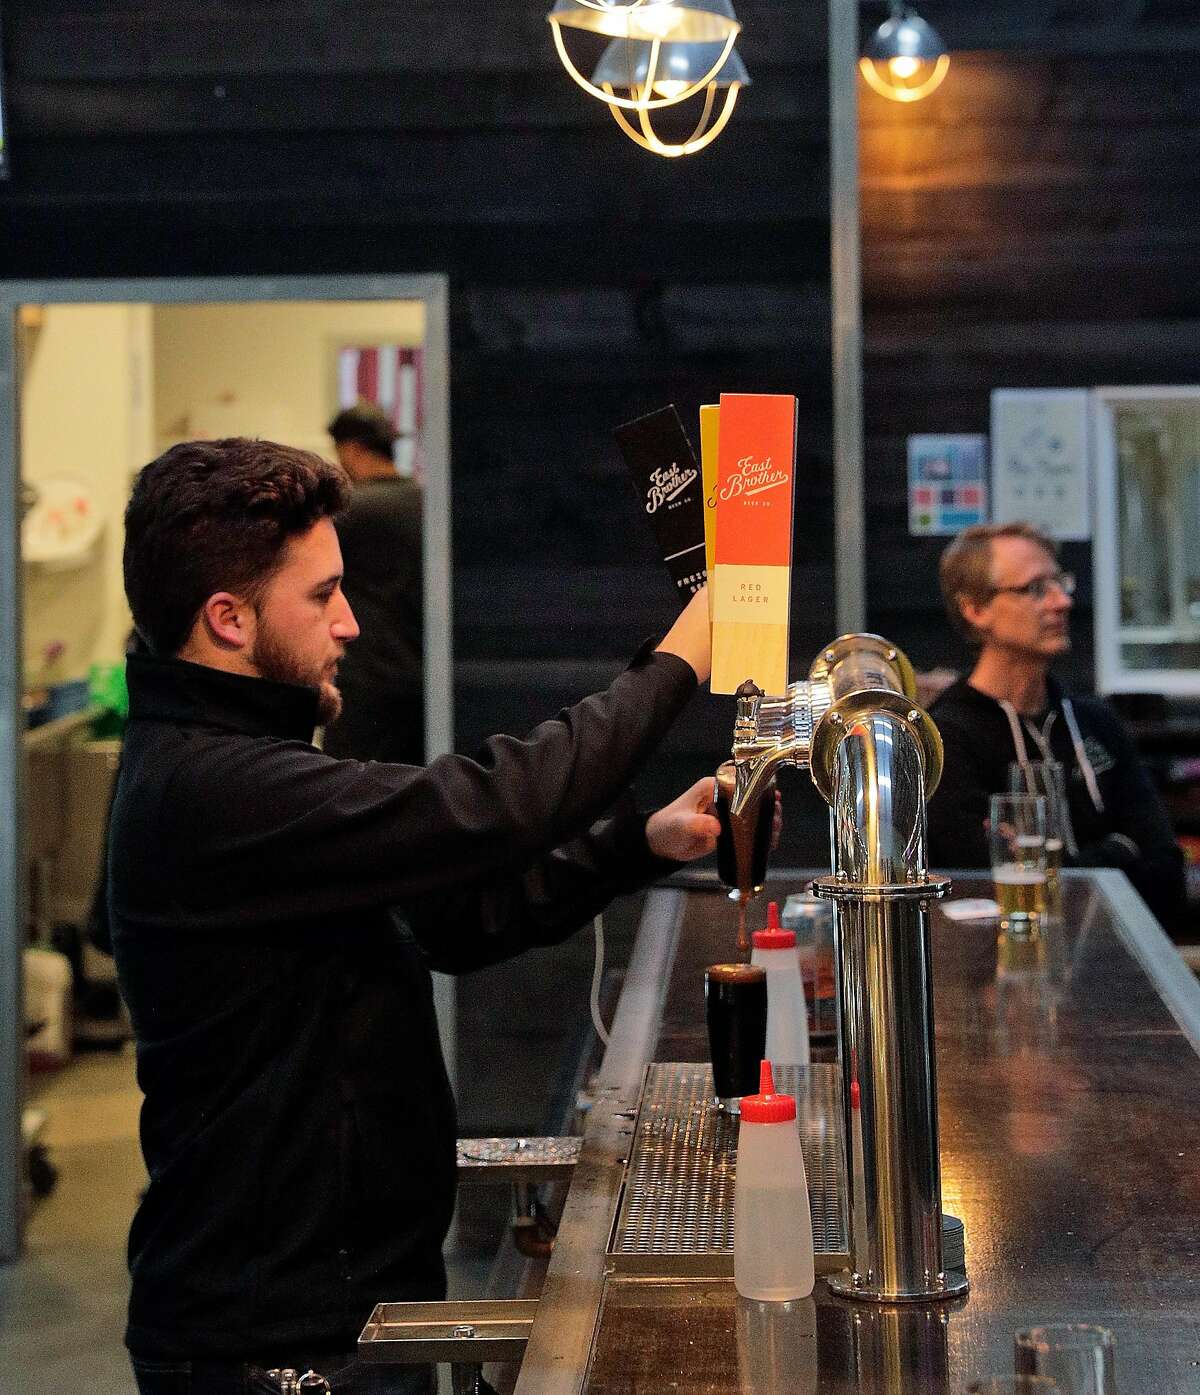 Bartender Gabriel Martin pours a beer behind the bar at East Brother Beer Company which is specializing in craft Lager beer in Richmond, Calif., on Thursday, January 16, 2020. There has been a rise of craft lager beers in the Bay Area, and unlike other local breweries that specialize in hoppy IPAs and sour beers, East Brother Beer Co. in Richmond focuses on classic, balanced lagers.